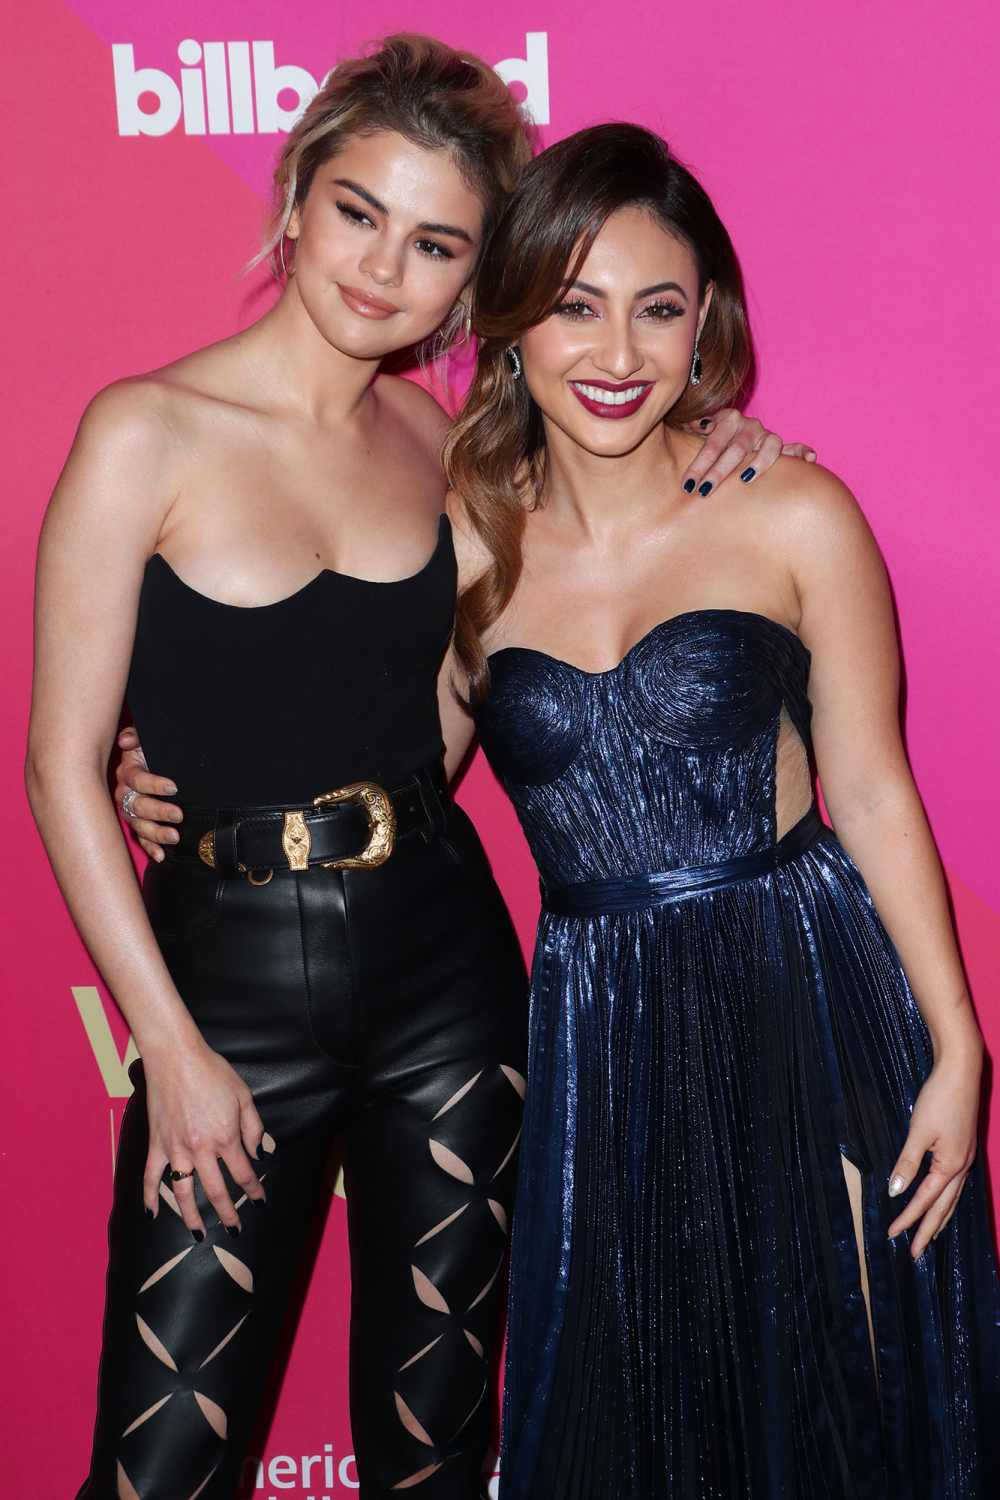 Francia Raisa Reacts After Selena Gomez Calls Taylor Swift ‘Only Friend in Music Industry’